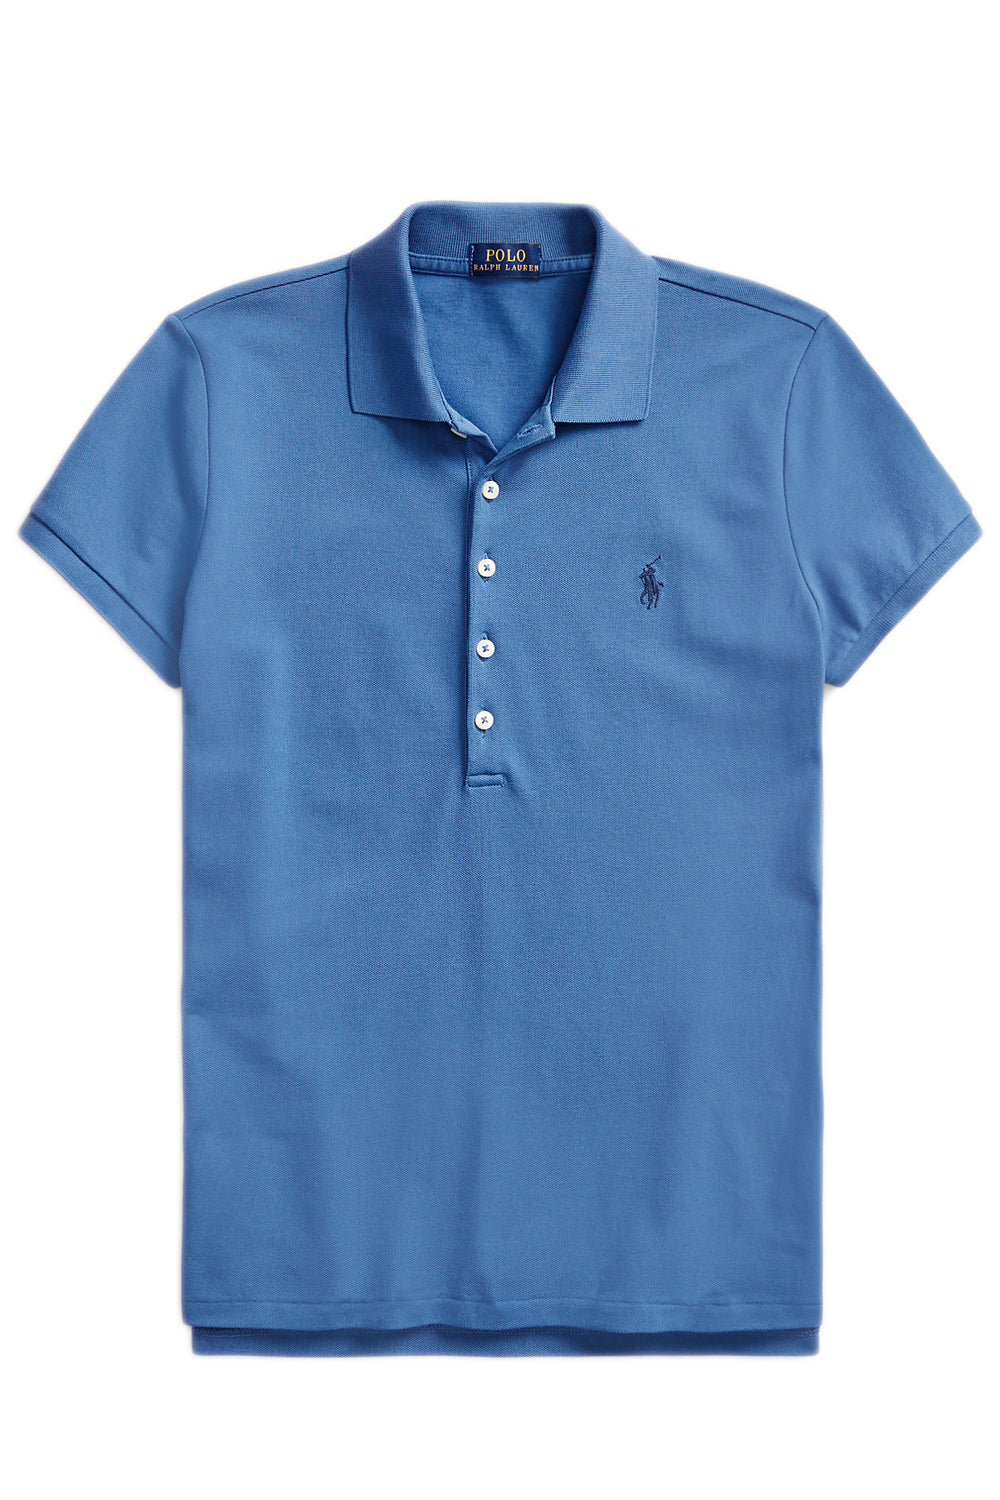 Image of Polo stretch Slim Fit - POLO RALPH LAUREN